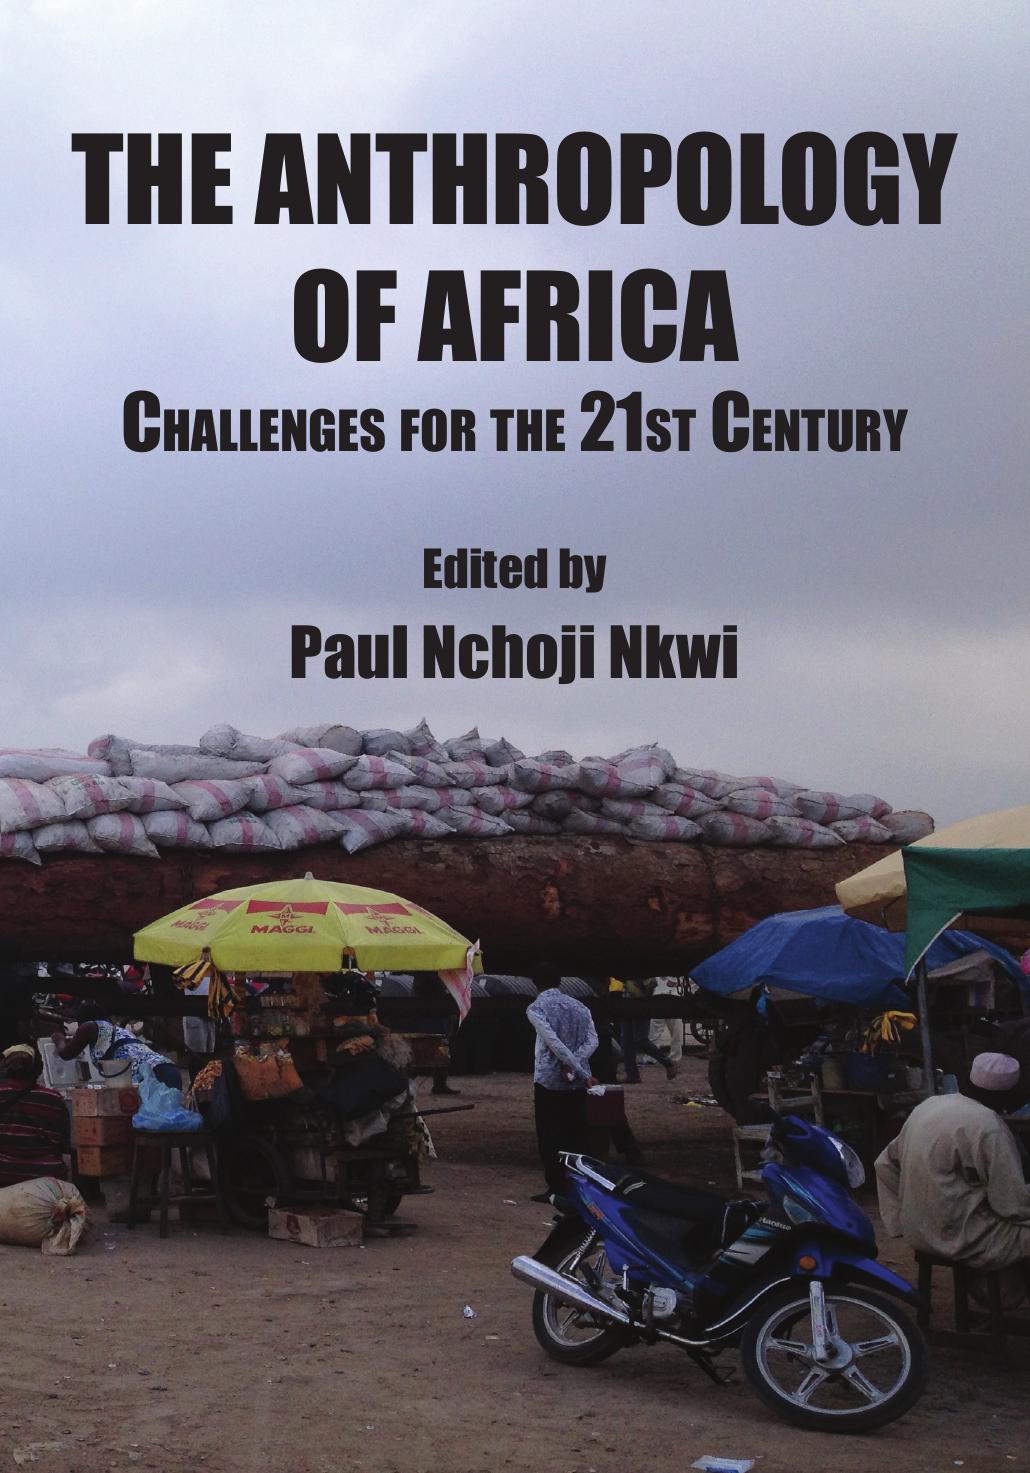 The Anthropology of Africa: Challenges for the 21st Century by Paul Nchoji Nkwi